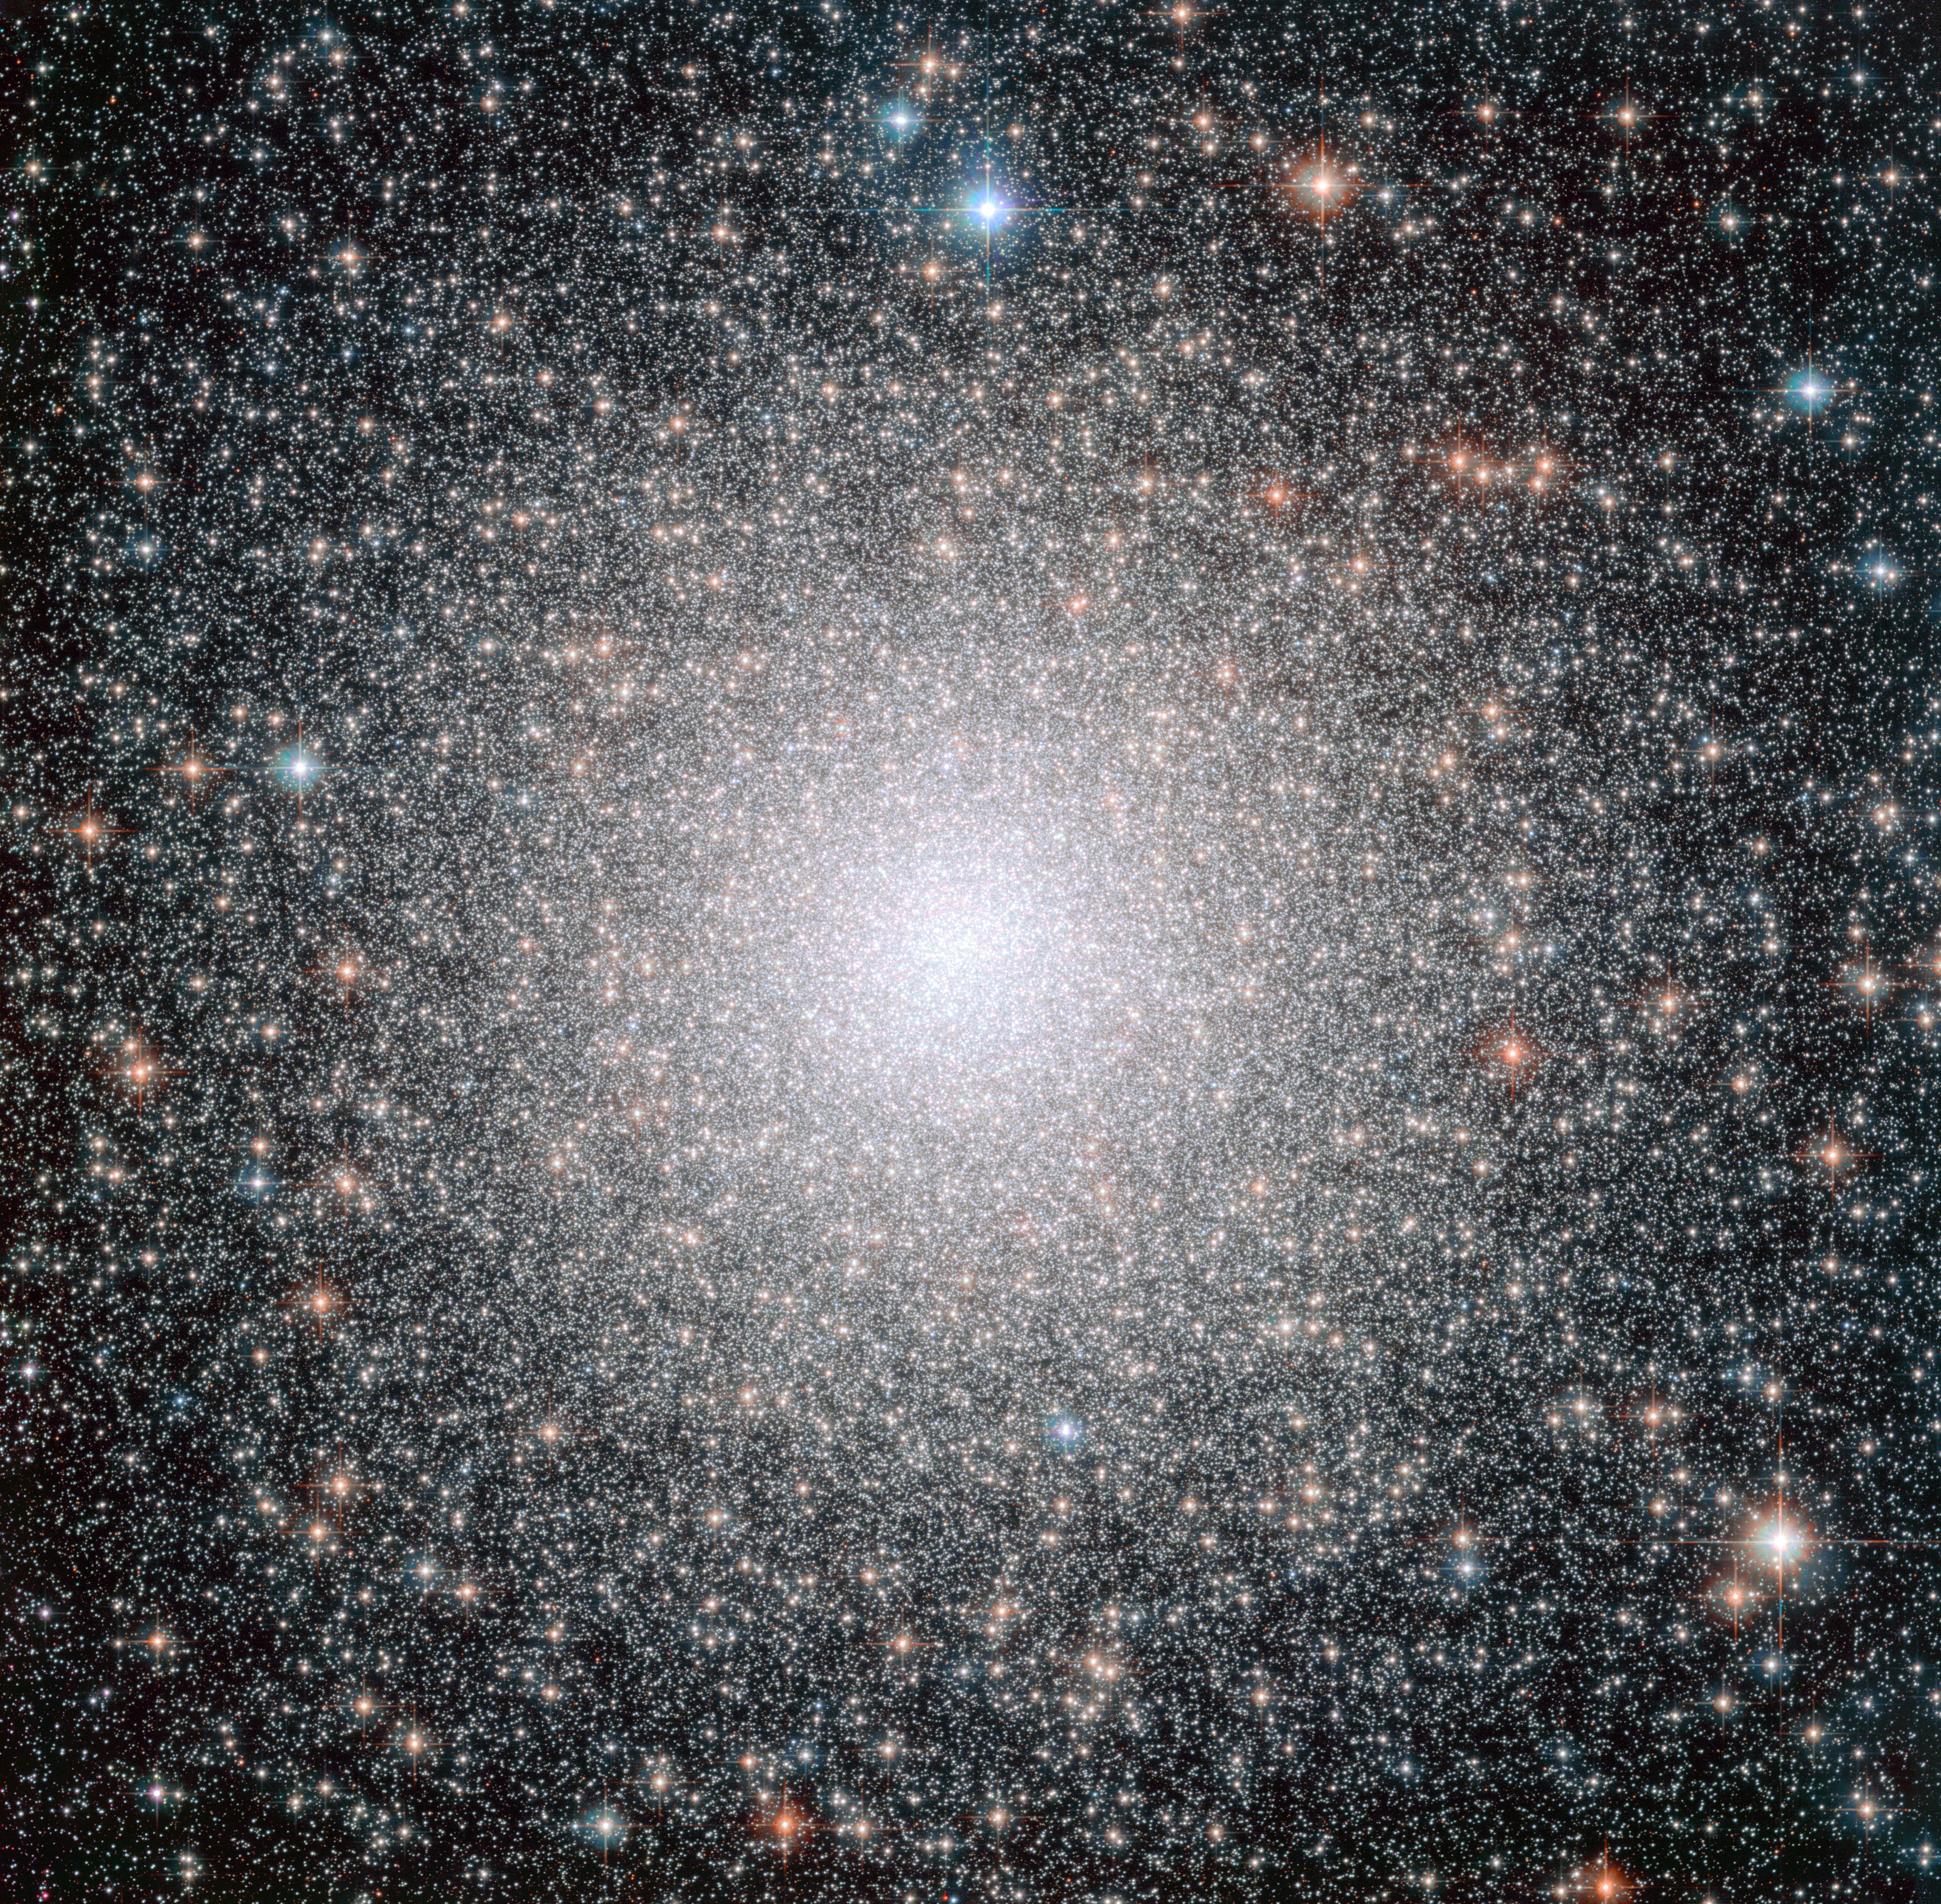 The globular cluster NGC 6388, observed by Hubble | ESA/Hubble